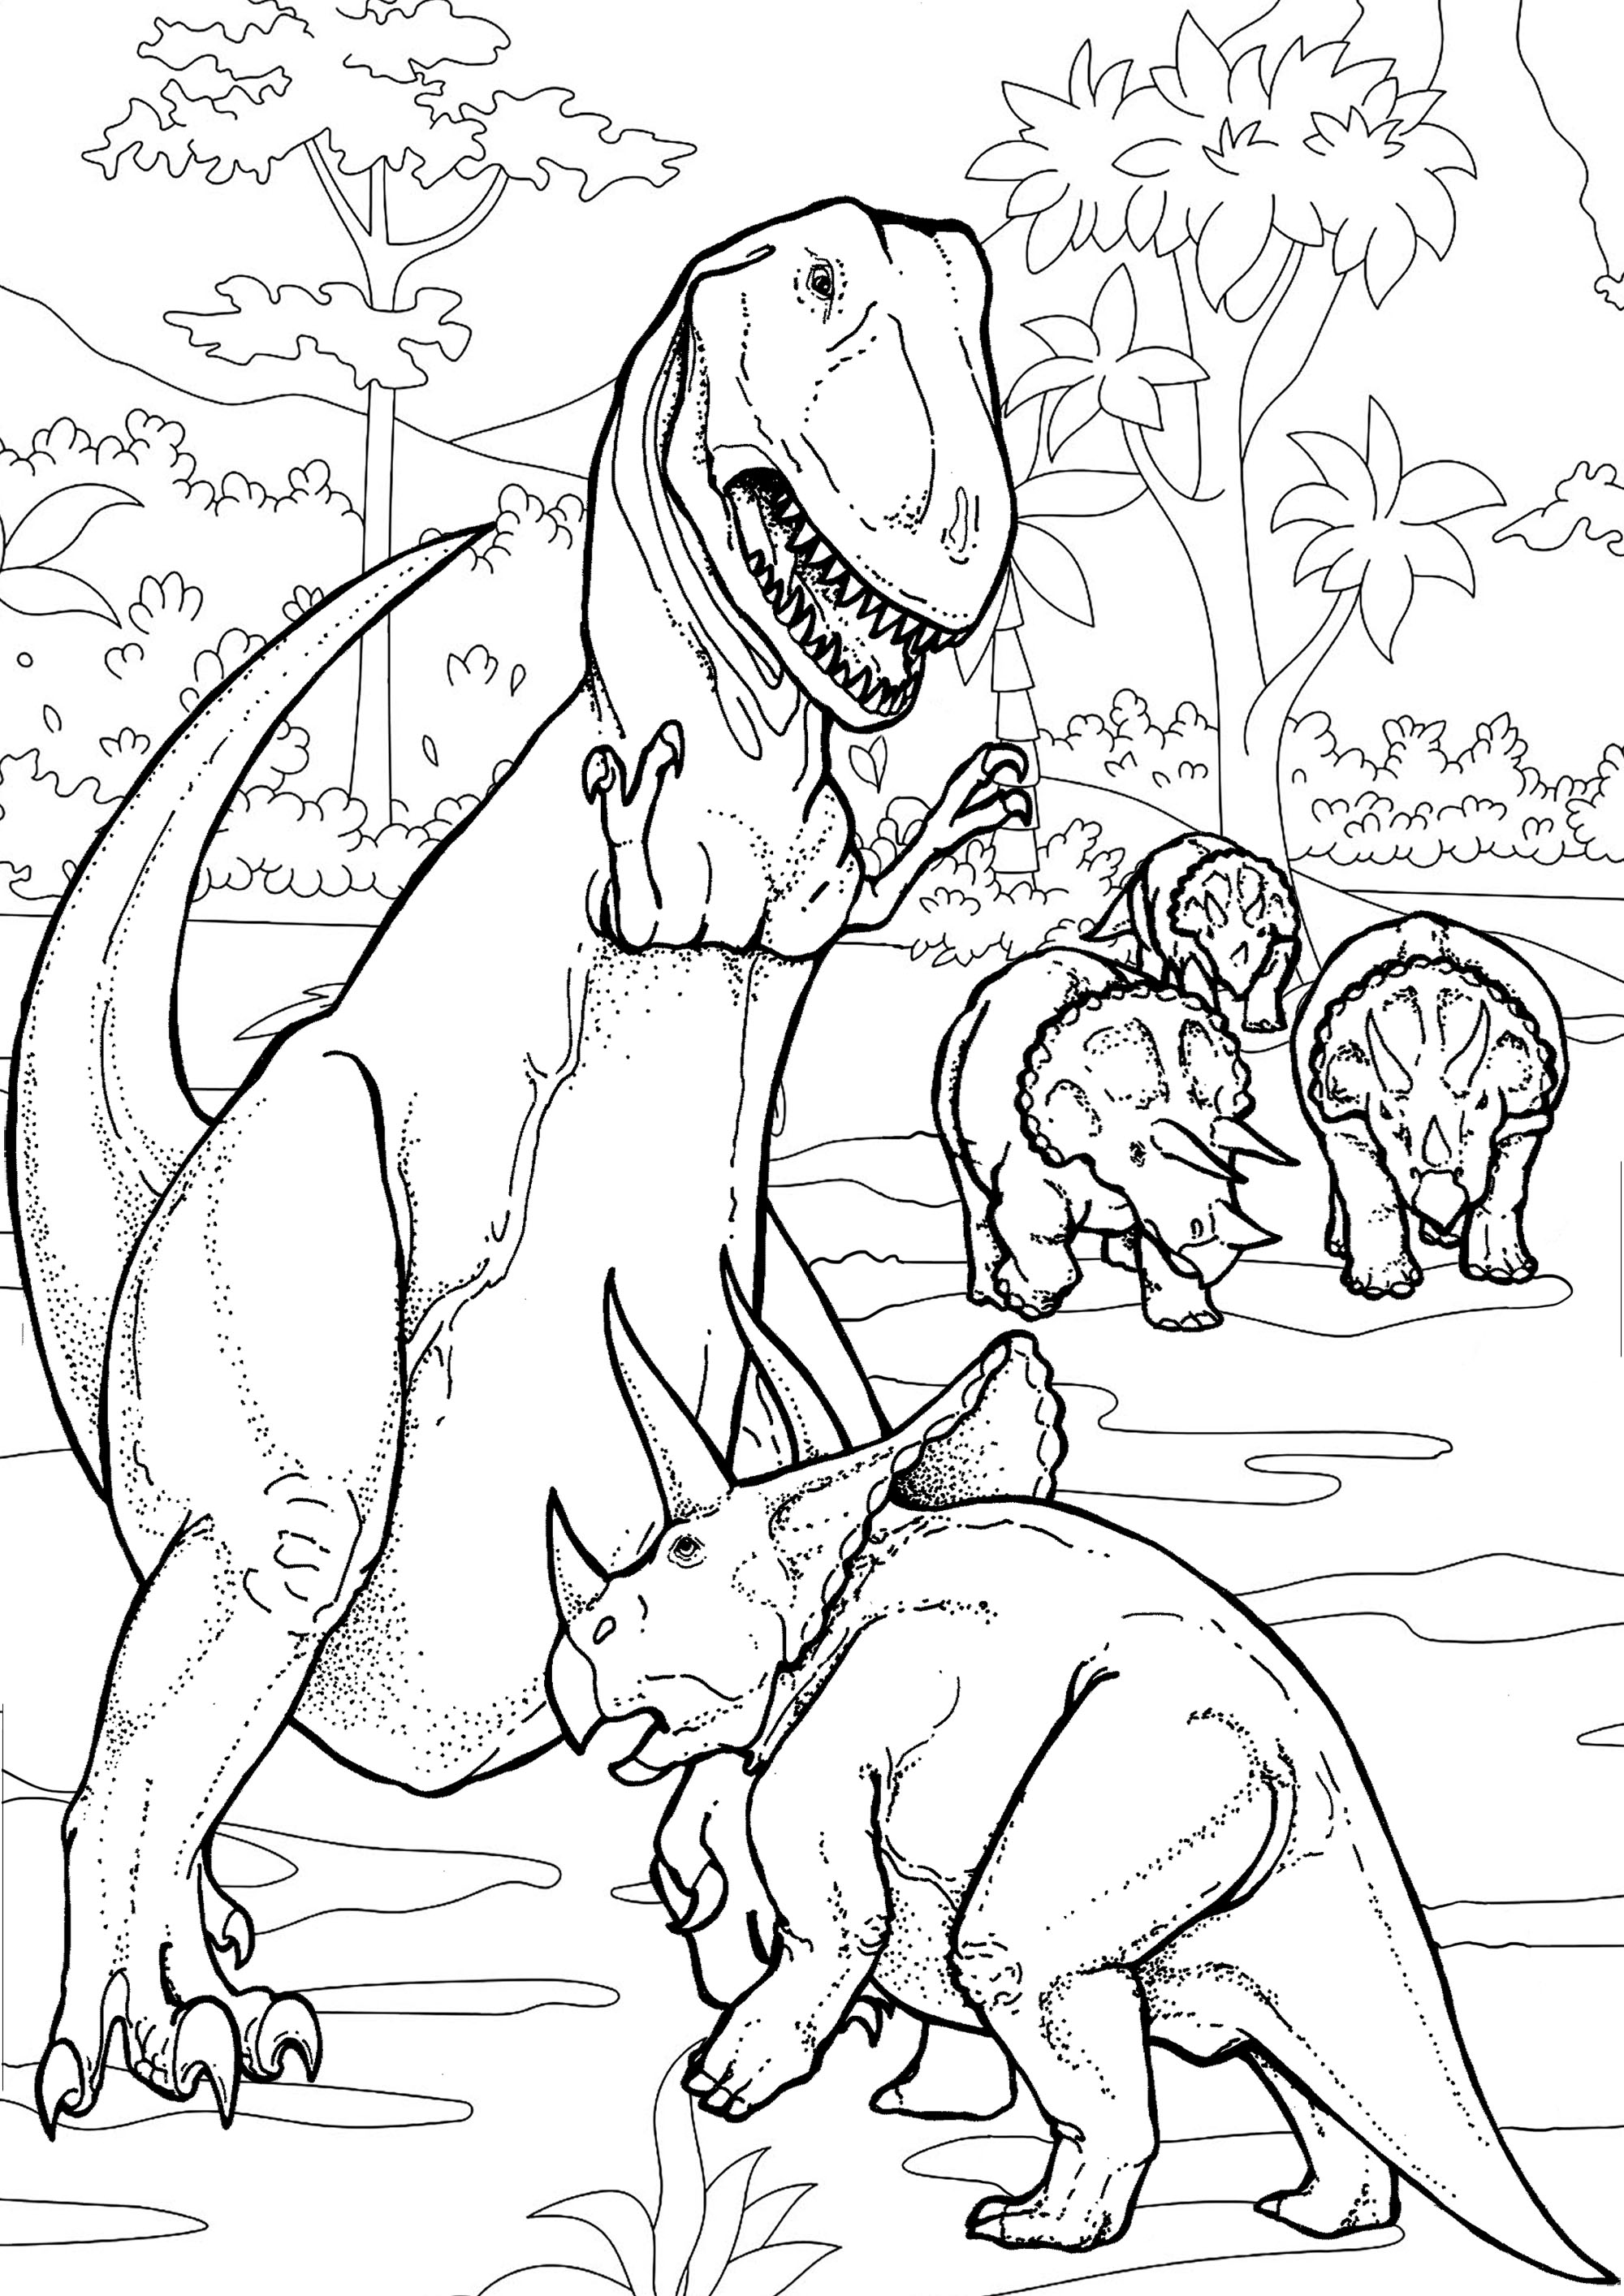 Download Dinosaurs Fighting Coloring Pages Coloring And Drawing